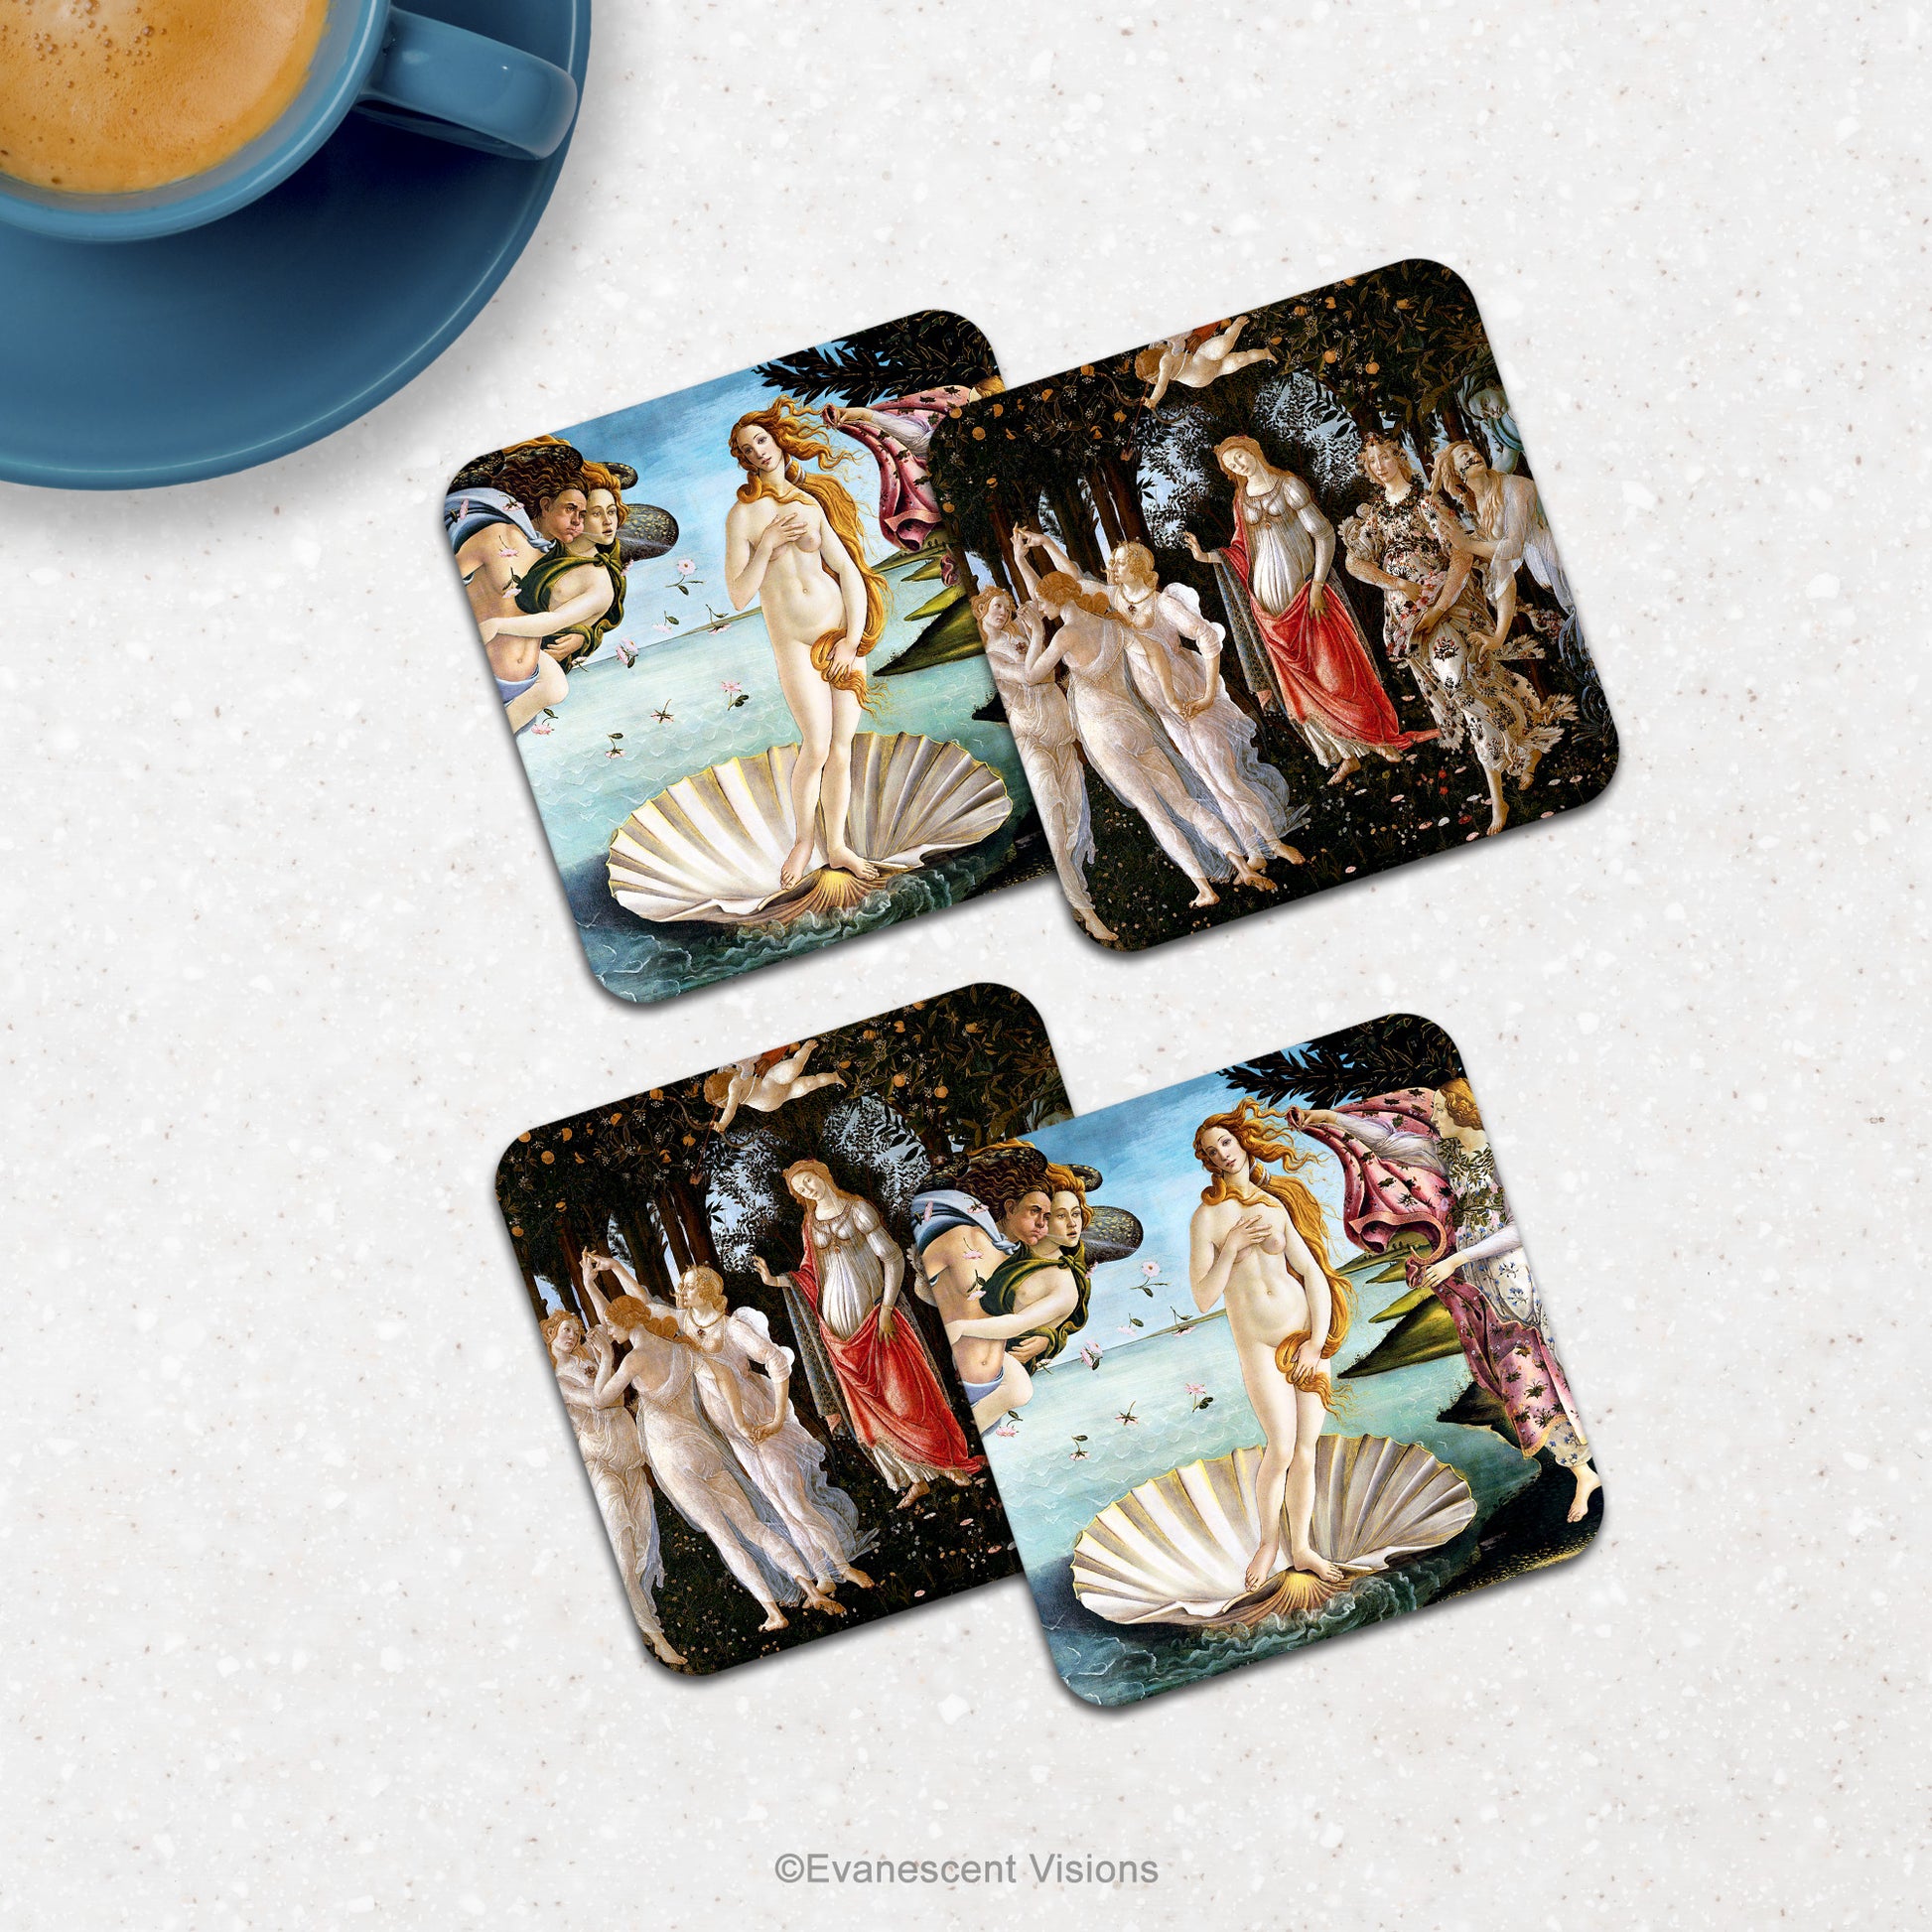 Botticelli-themed coasters shown on counter top with drink.